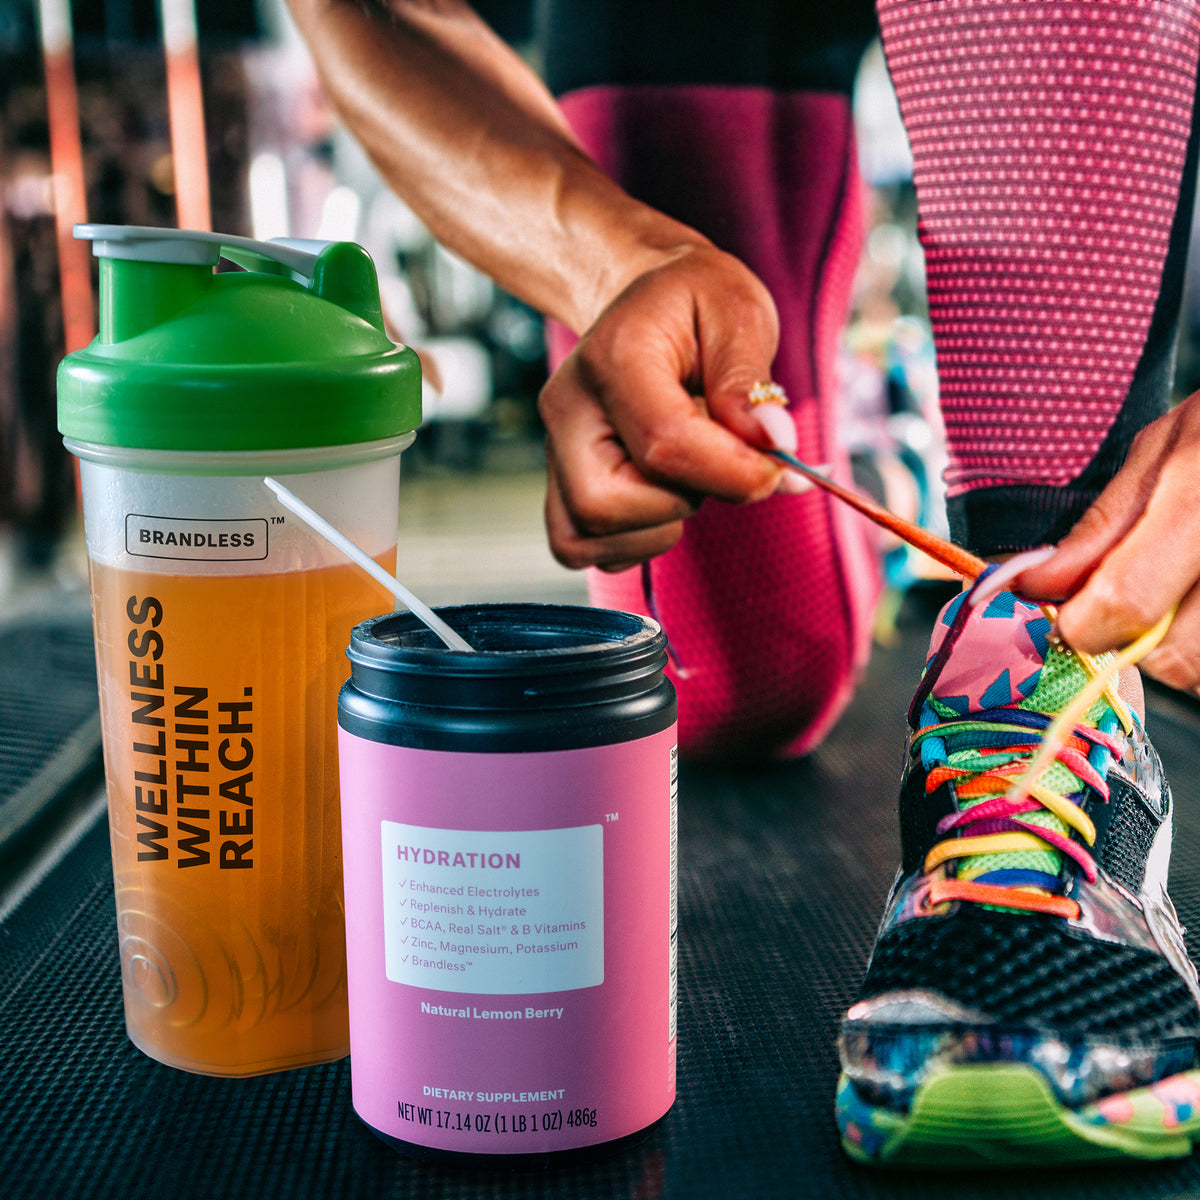 Lifestyle photo, runner in bright neon colors kneels on a gym floor to tie a shoelace next to a shaker bottle with lemon berry hydration mixed in it.